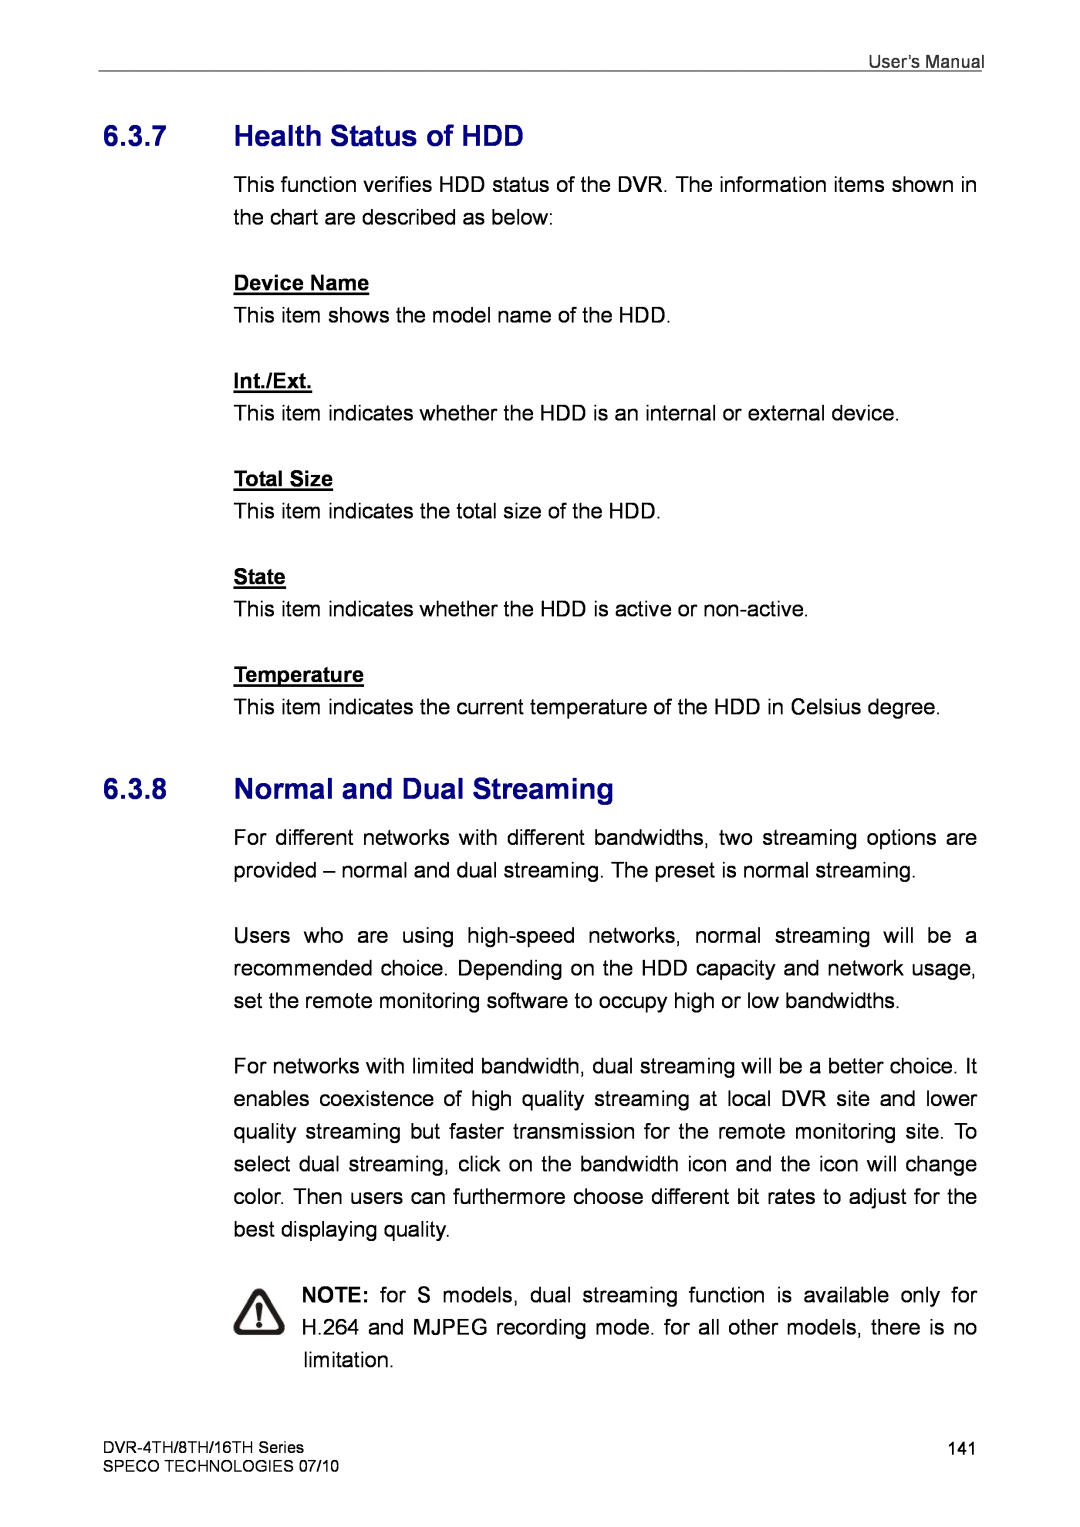 Speco Technologies 4TH, 8TH, 16TH Health Status of HDD, Normal and Dual Streaming, Int./Ext, Total Size, State, Temperature 